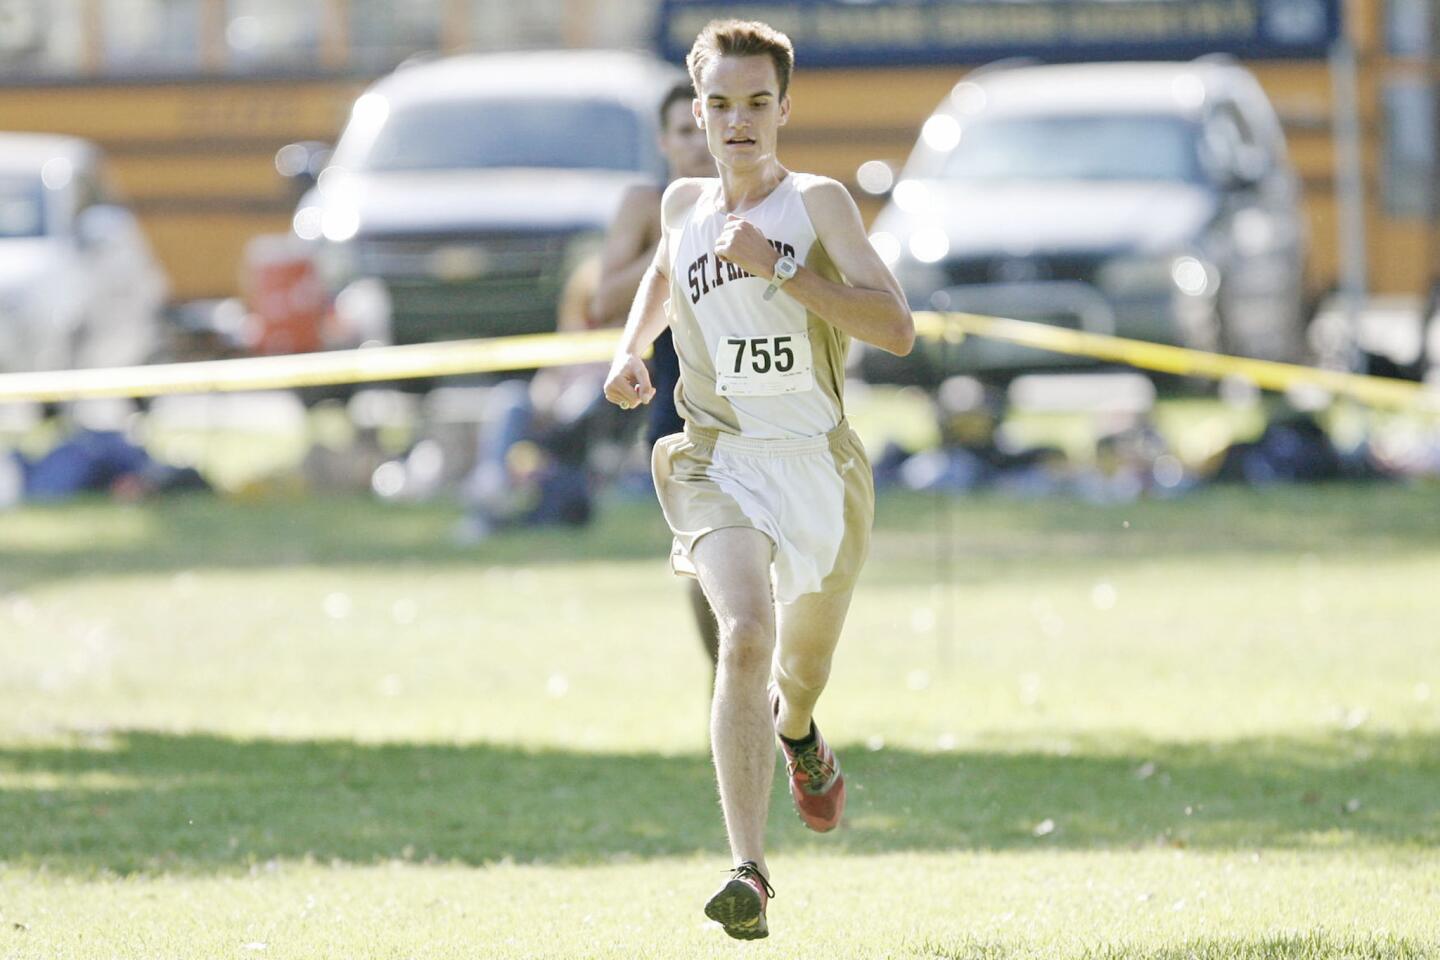 St. Francis' J.D. Kieffer runs to the finish line during a meet at Balboa Park in Encino on Thursday, October 4, 2012.